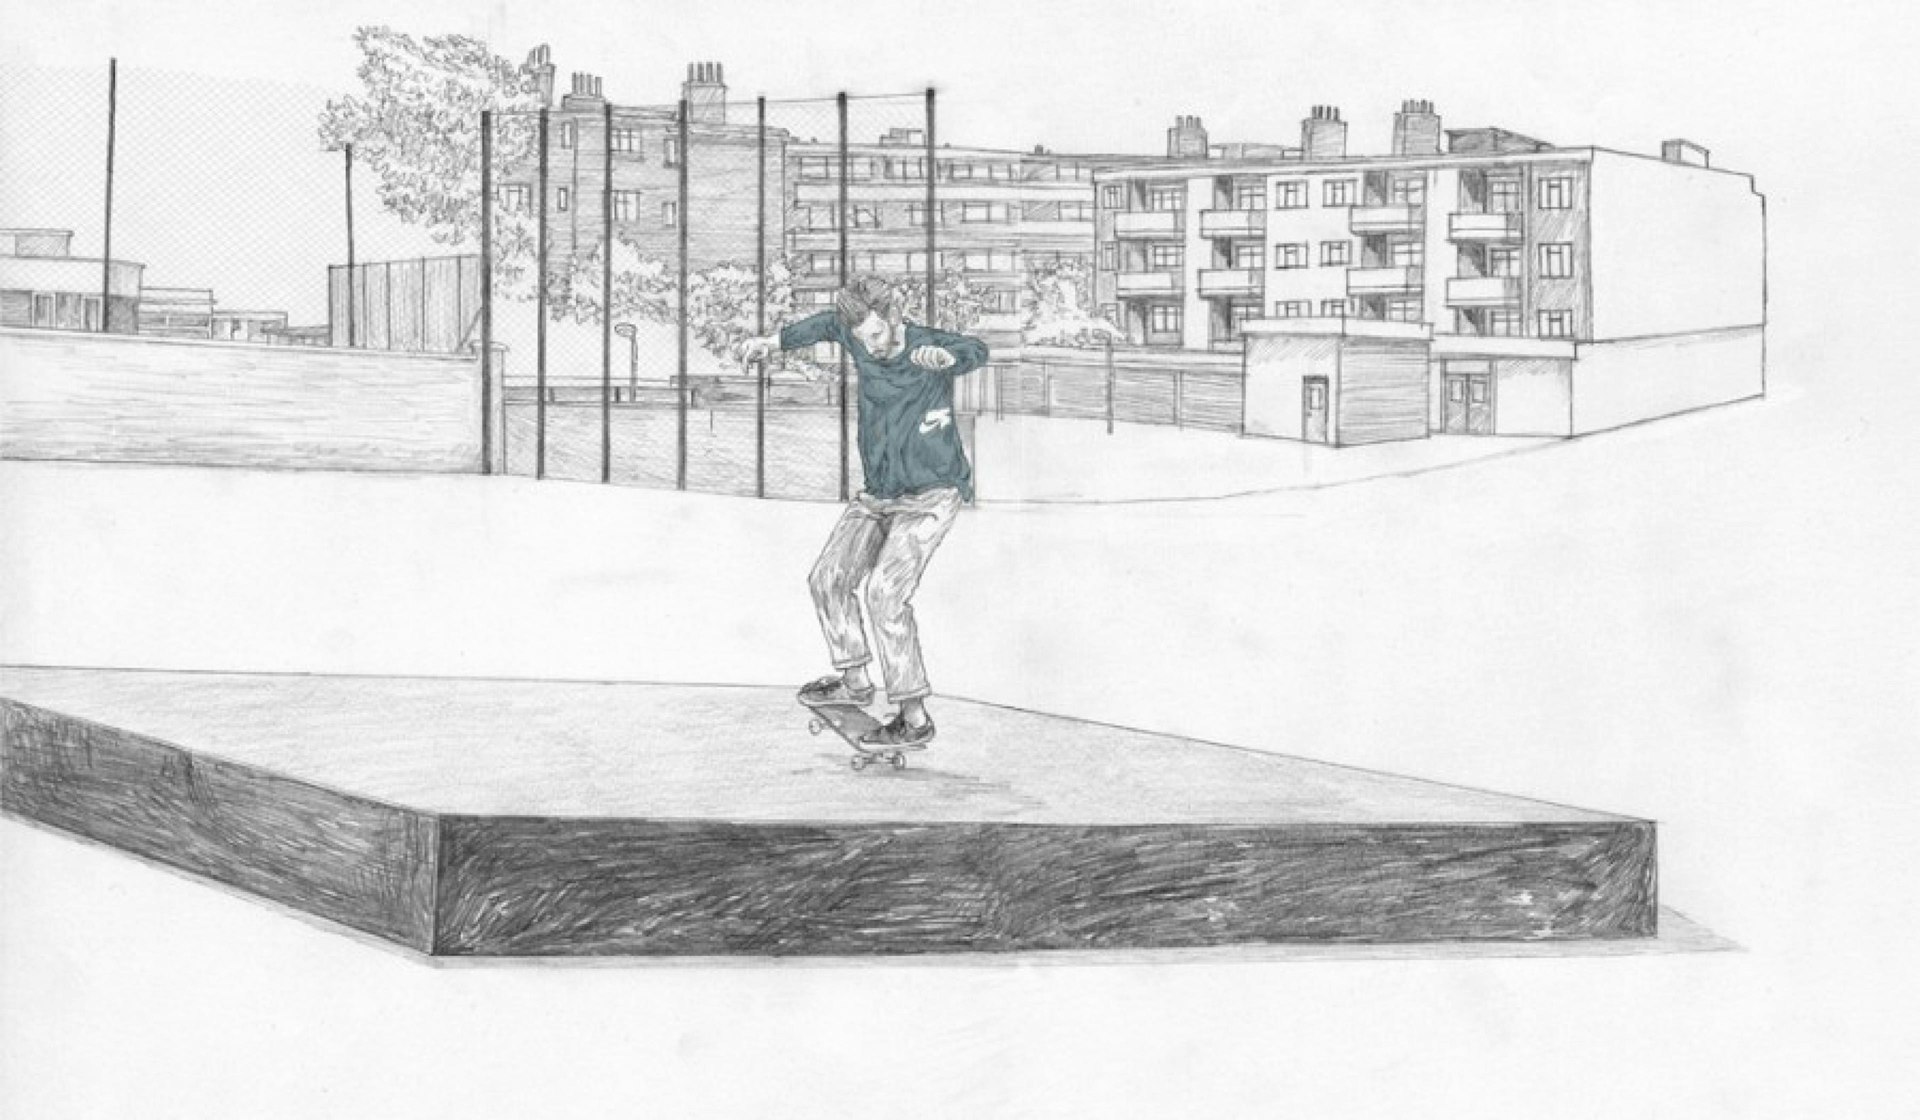 Artist Keith Watts pays tribute to London skateboarding